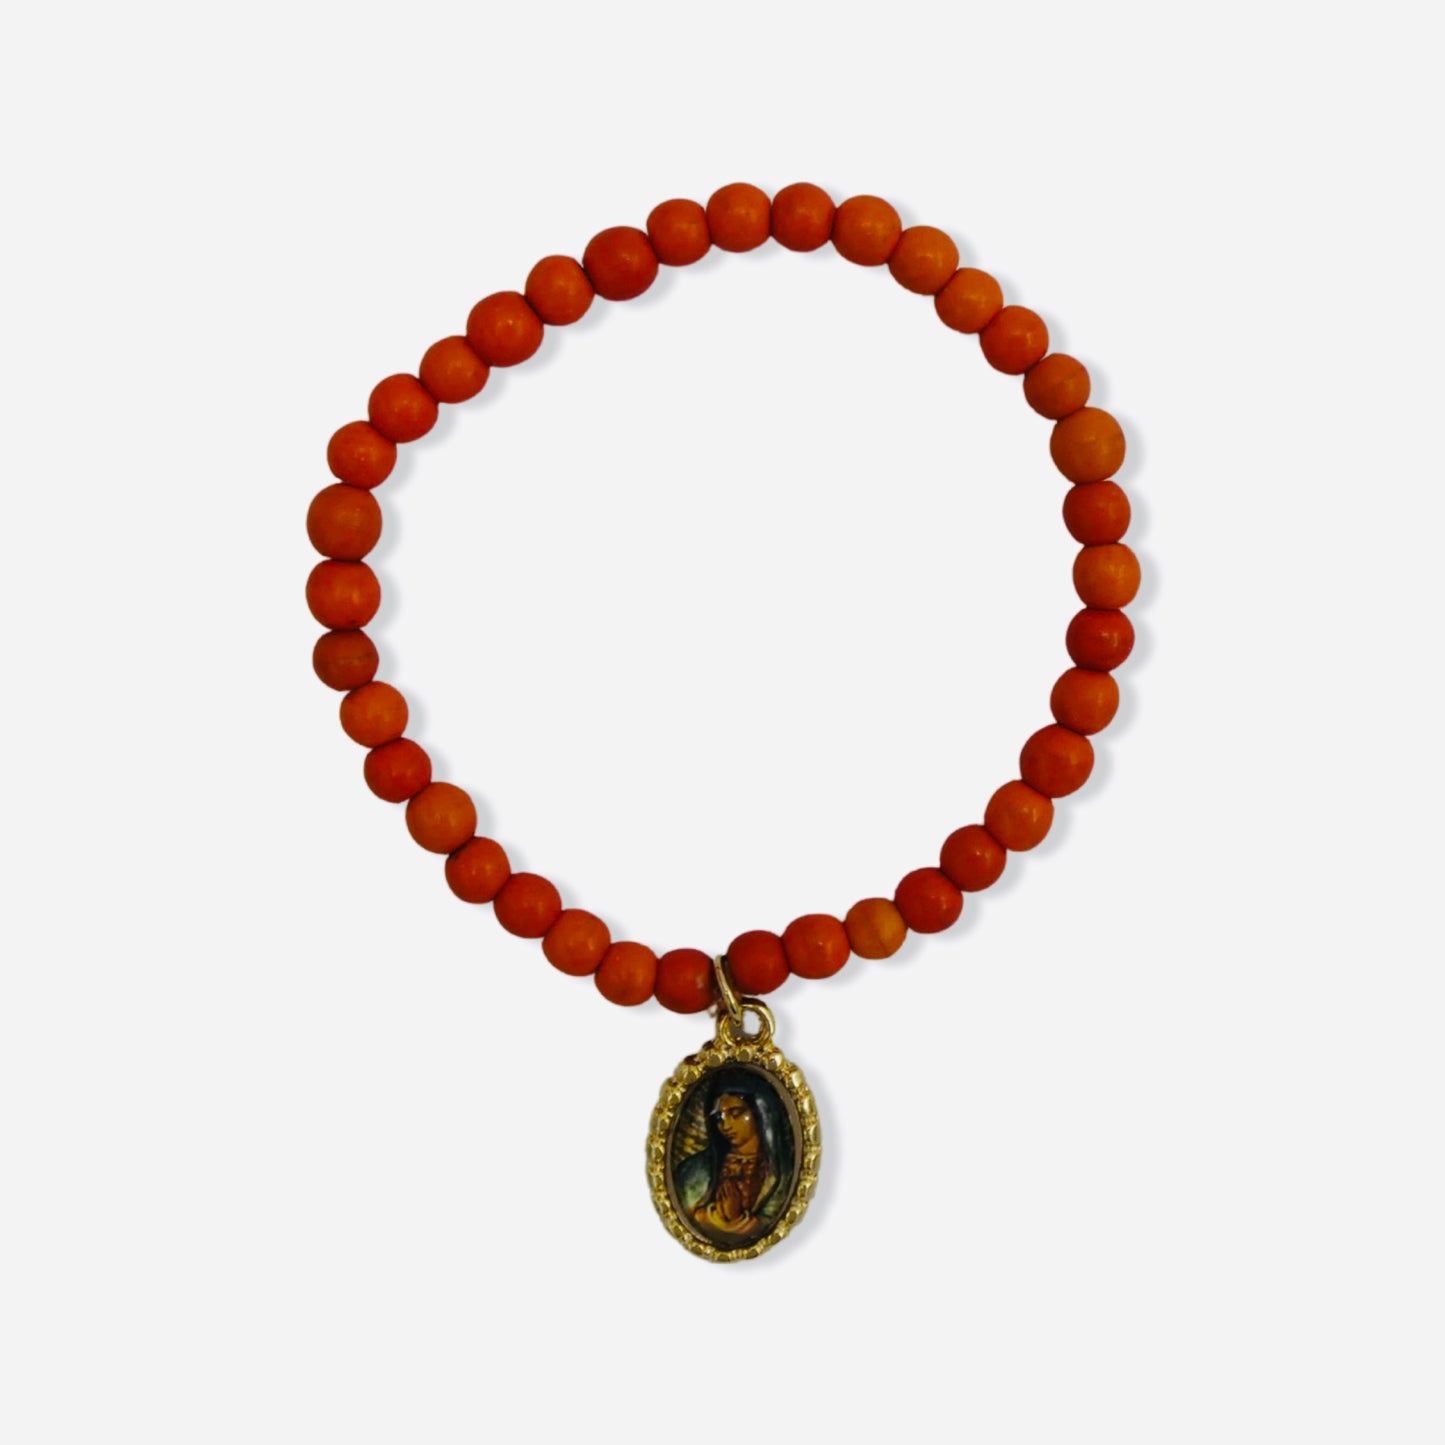 Children's Guadalupe Bracelet of Assorted Colors